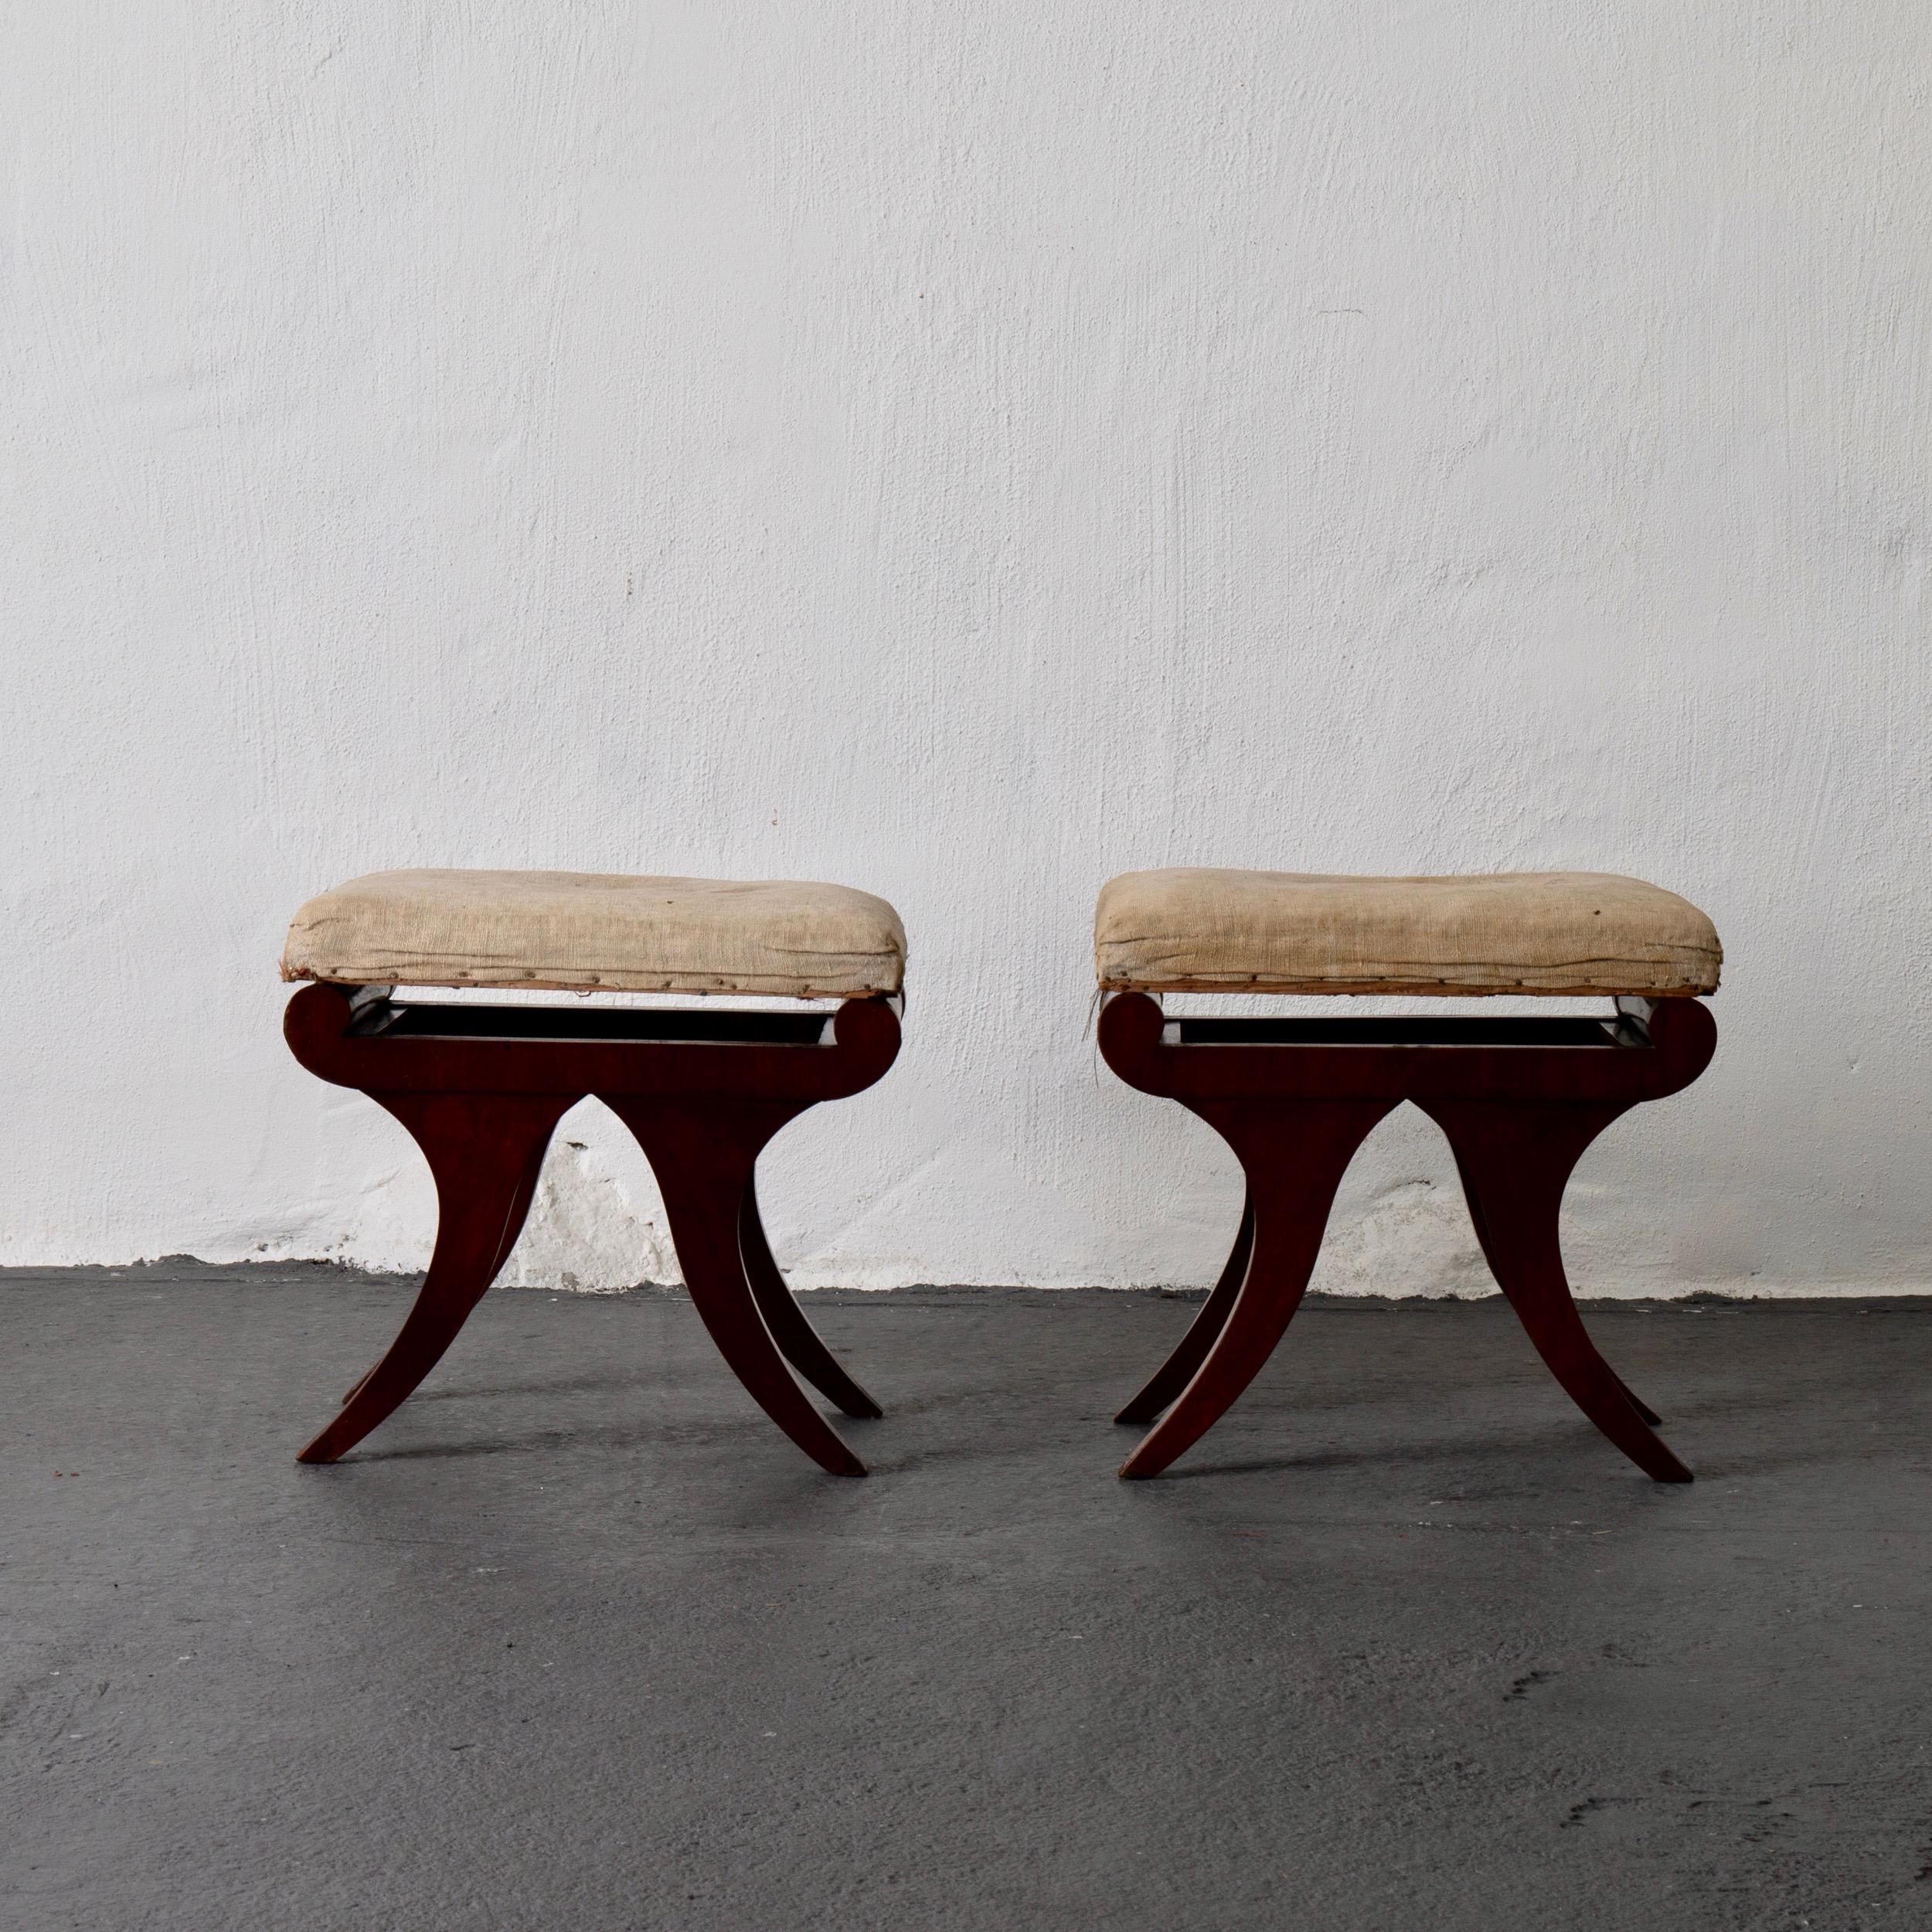 Stools pair of Swedish mahogany Empire, Sweden. A pair of stools made during the Empire period in Sweden. Frame in mahogany. Seats in a worn linen.
    